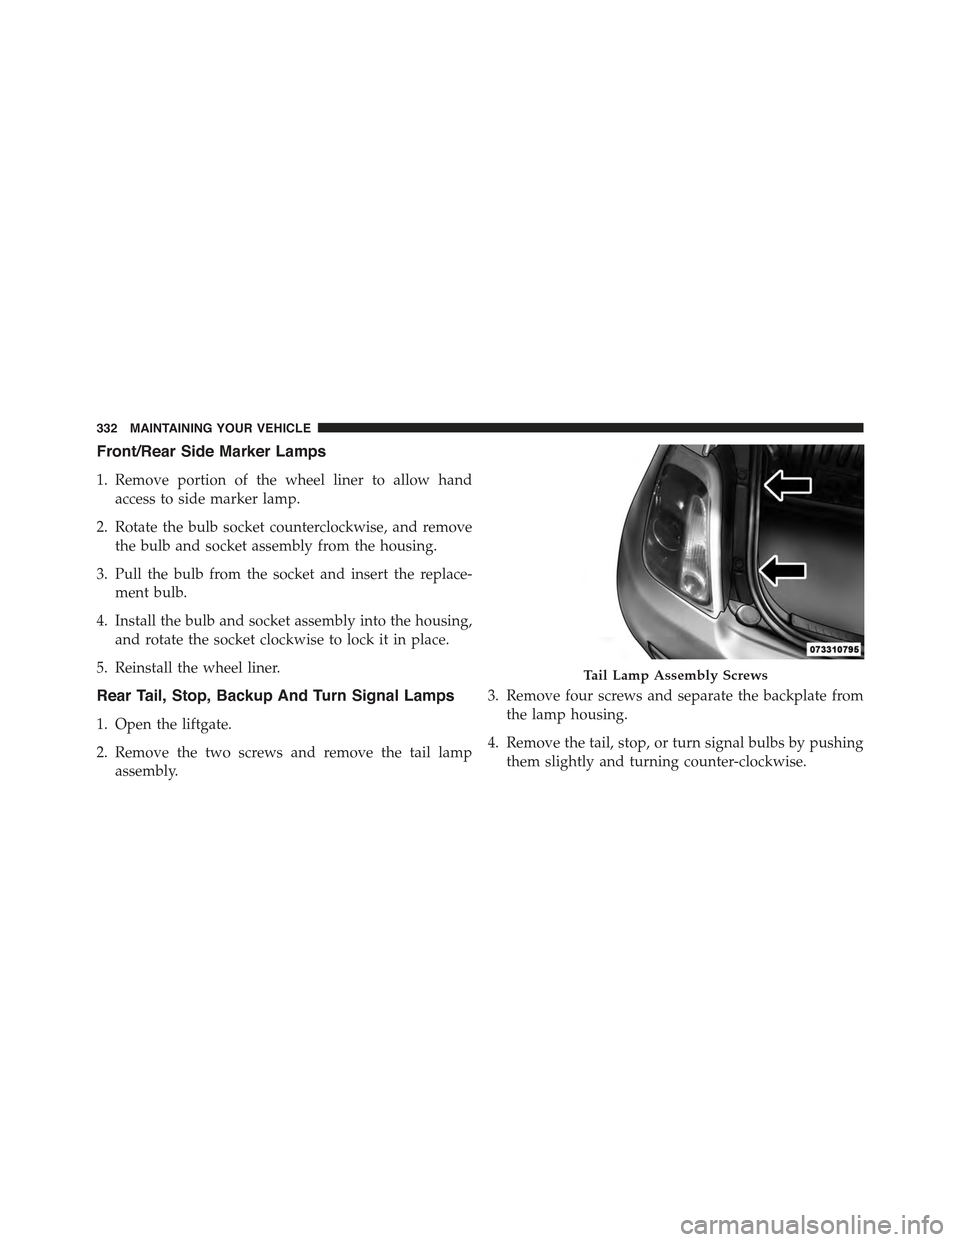 FIAT 500E 2015 2.G Owners Manual Front/Rear Side Marker Lamps
1. Remove portion of the wheel liner to allow hand
access to side marker lamp.
2. Rotate the bulb socket counterclockwise, and remove
the bulb and socket assembly from the